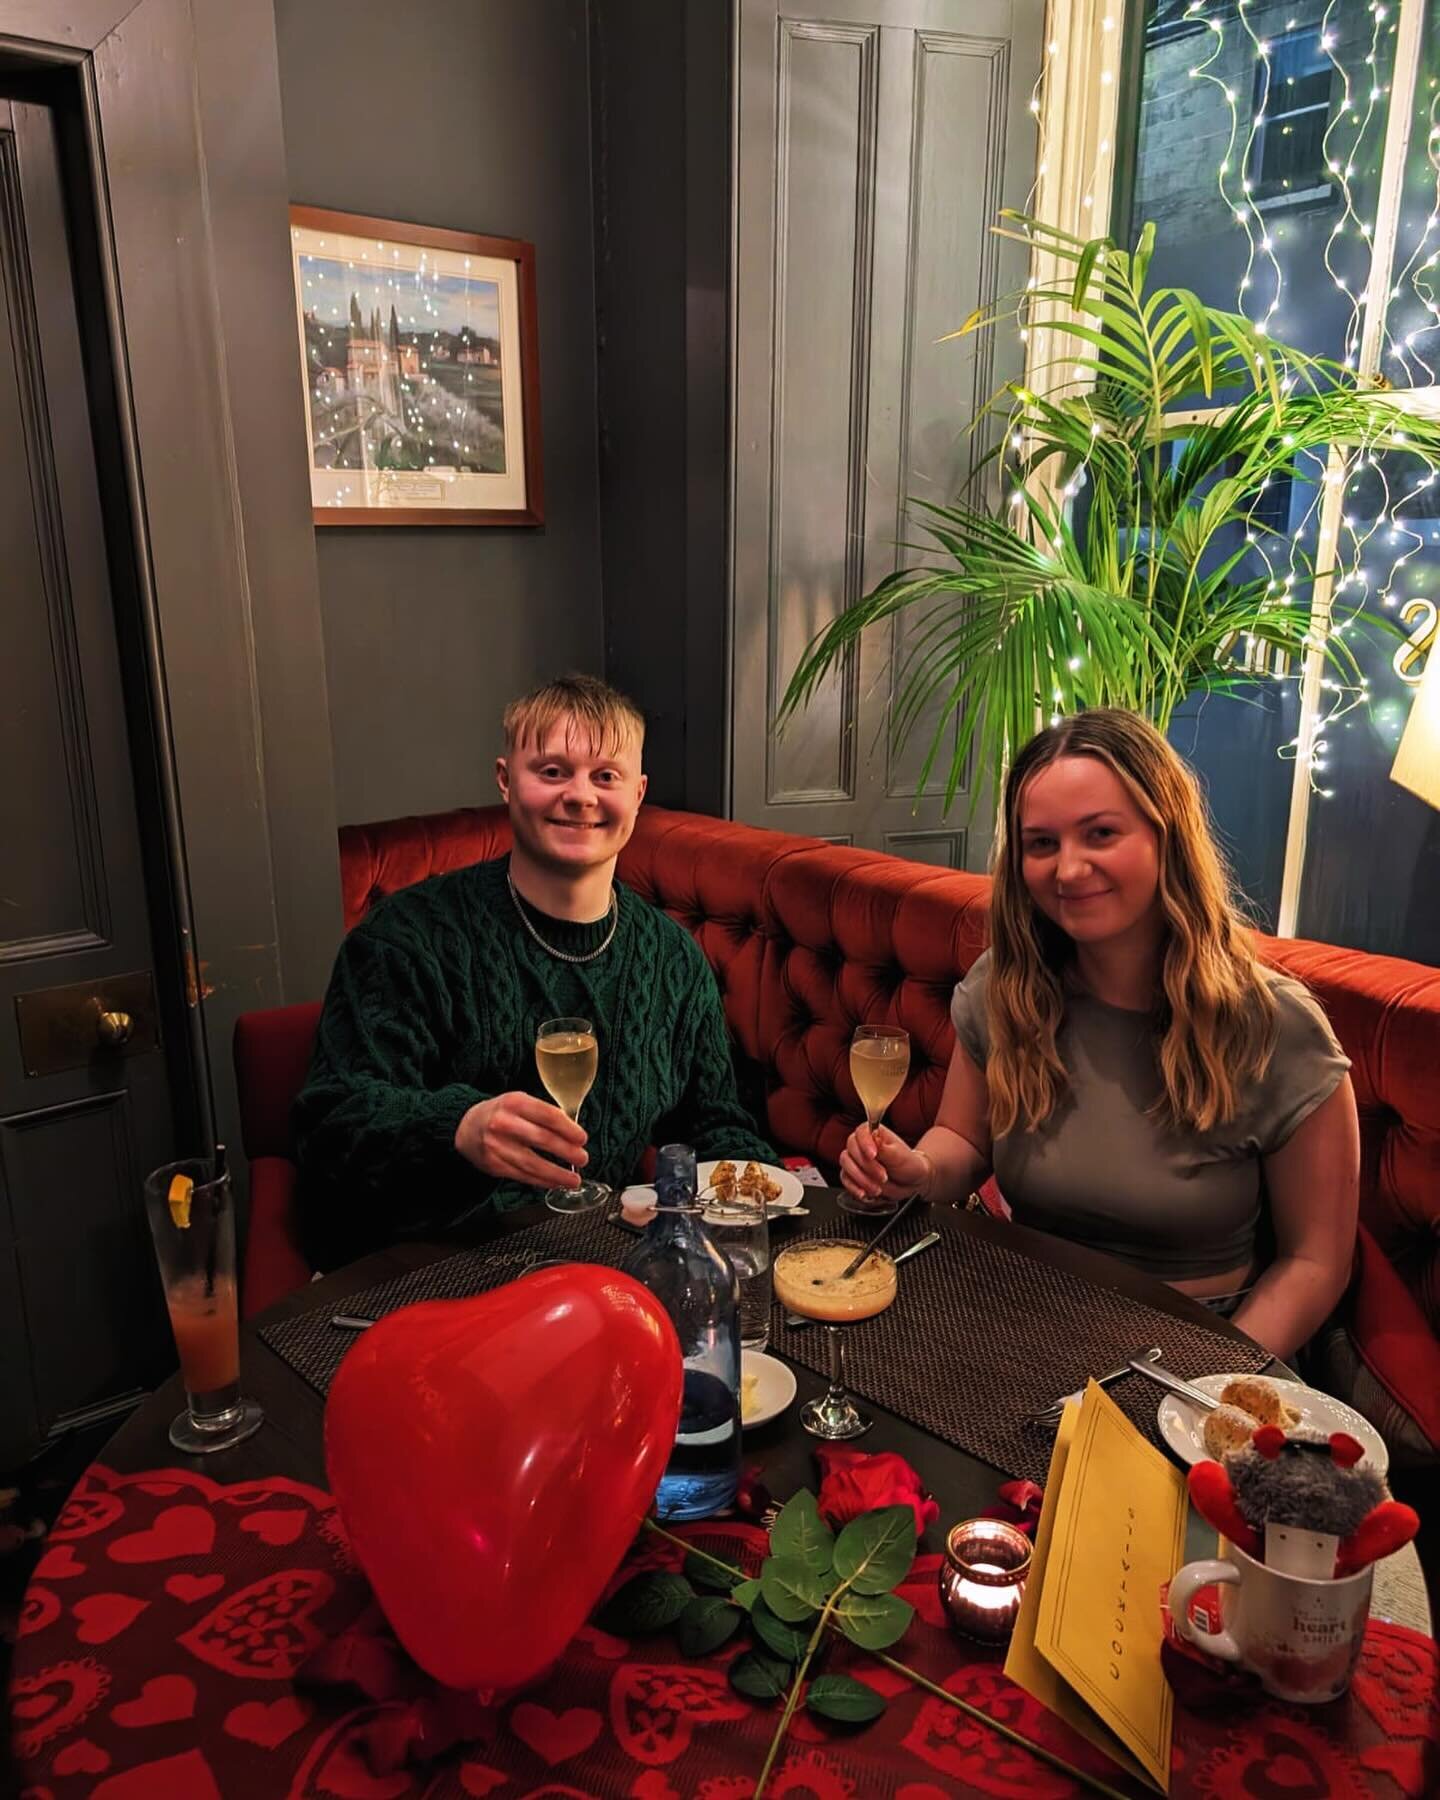 Valentines Day was an enormous success this year! Huge thank you to all of our guests, who really made our night, giving the restaurant a fantastic atmosphere and really enjoyable surroundings to host! This amazing couple went above and beyond though